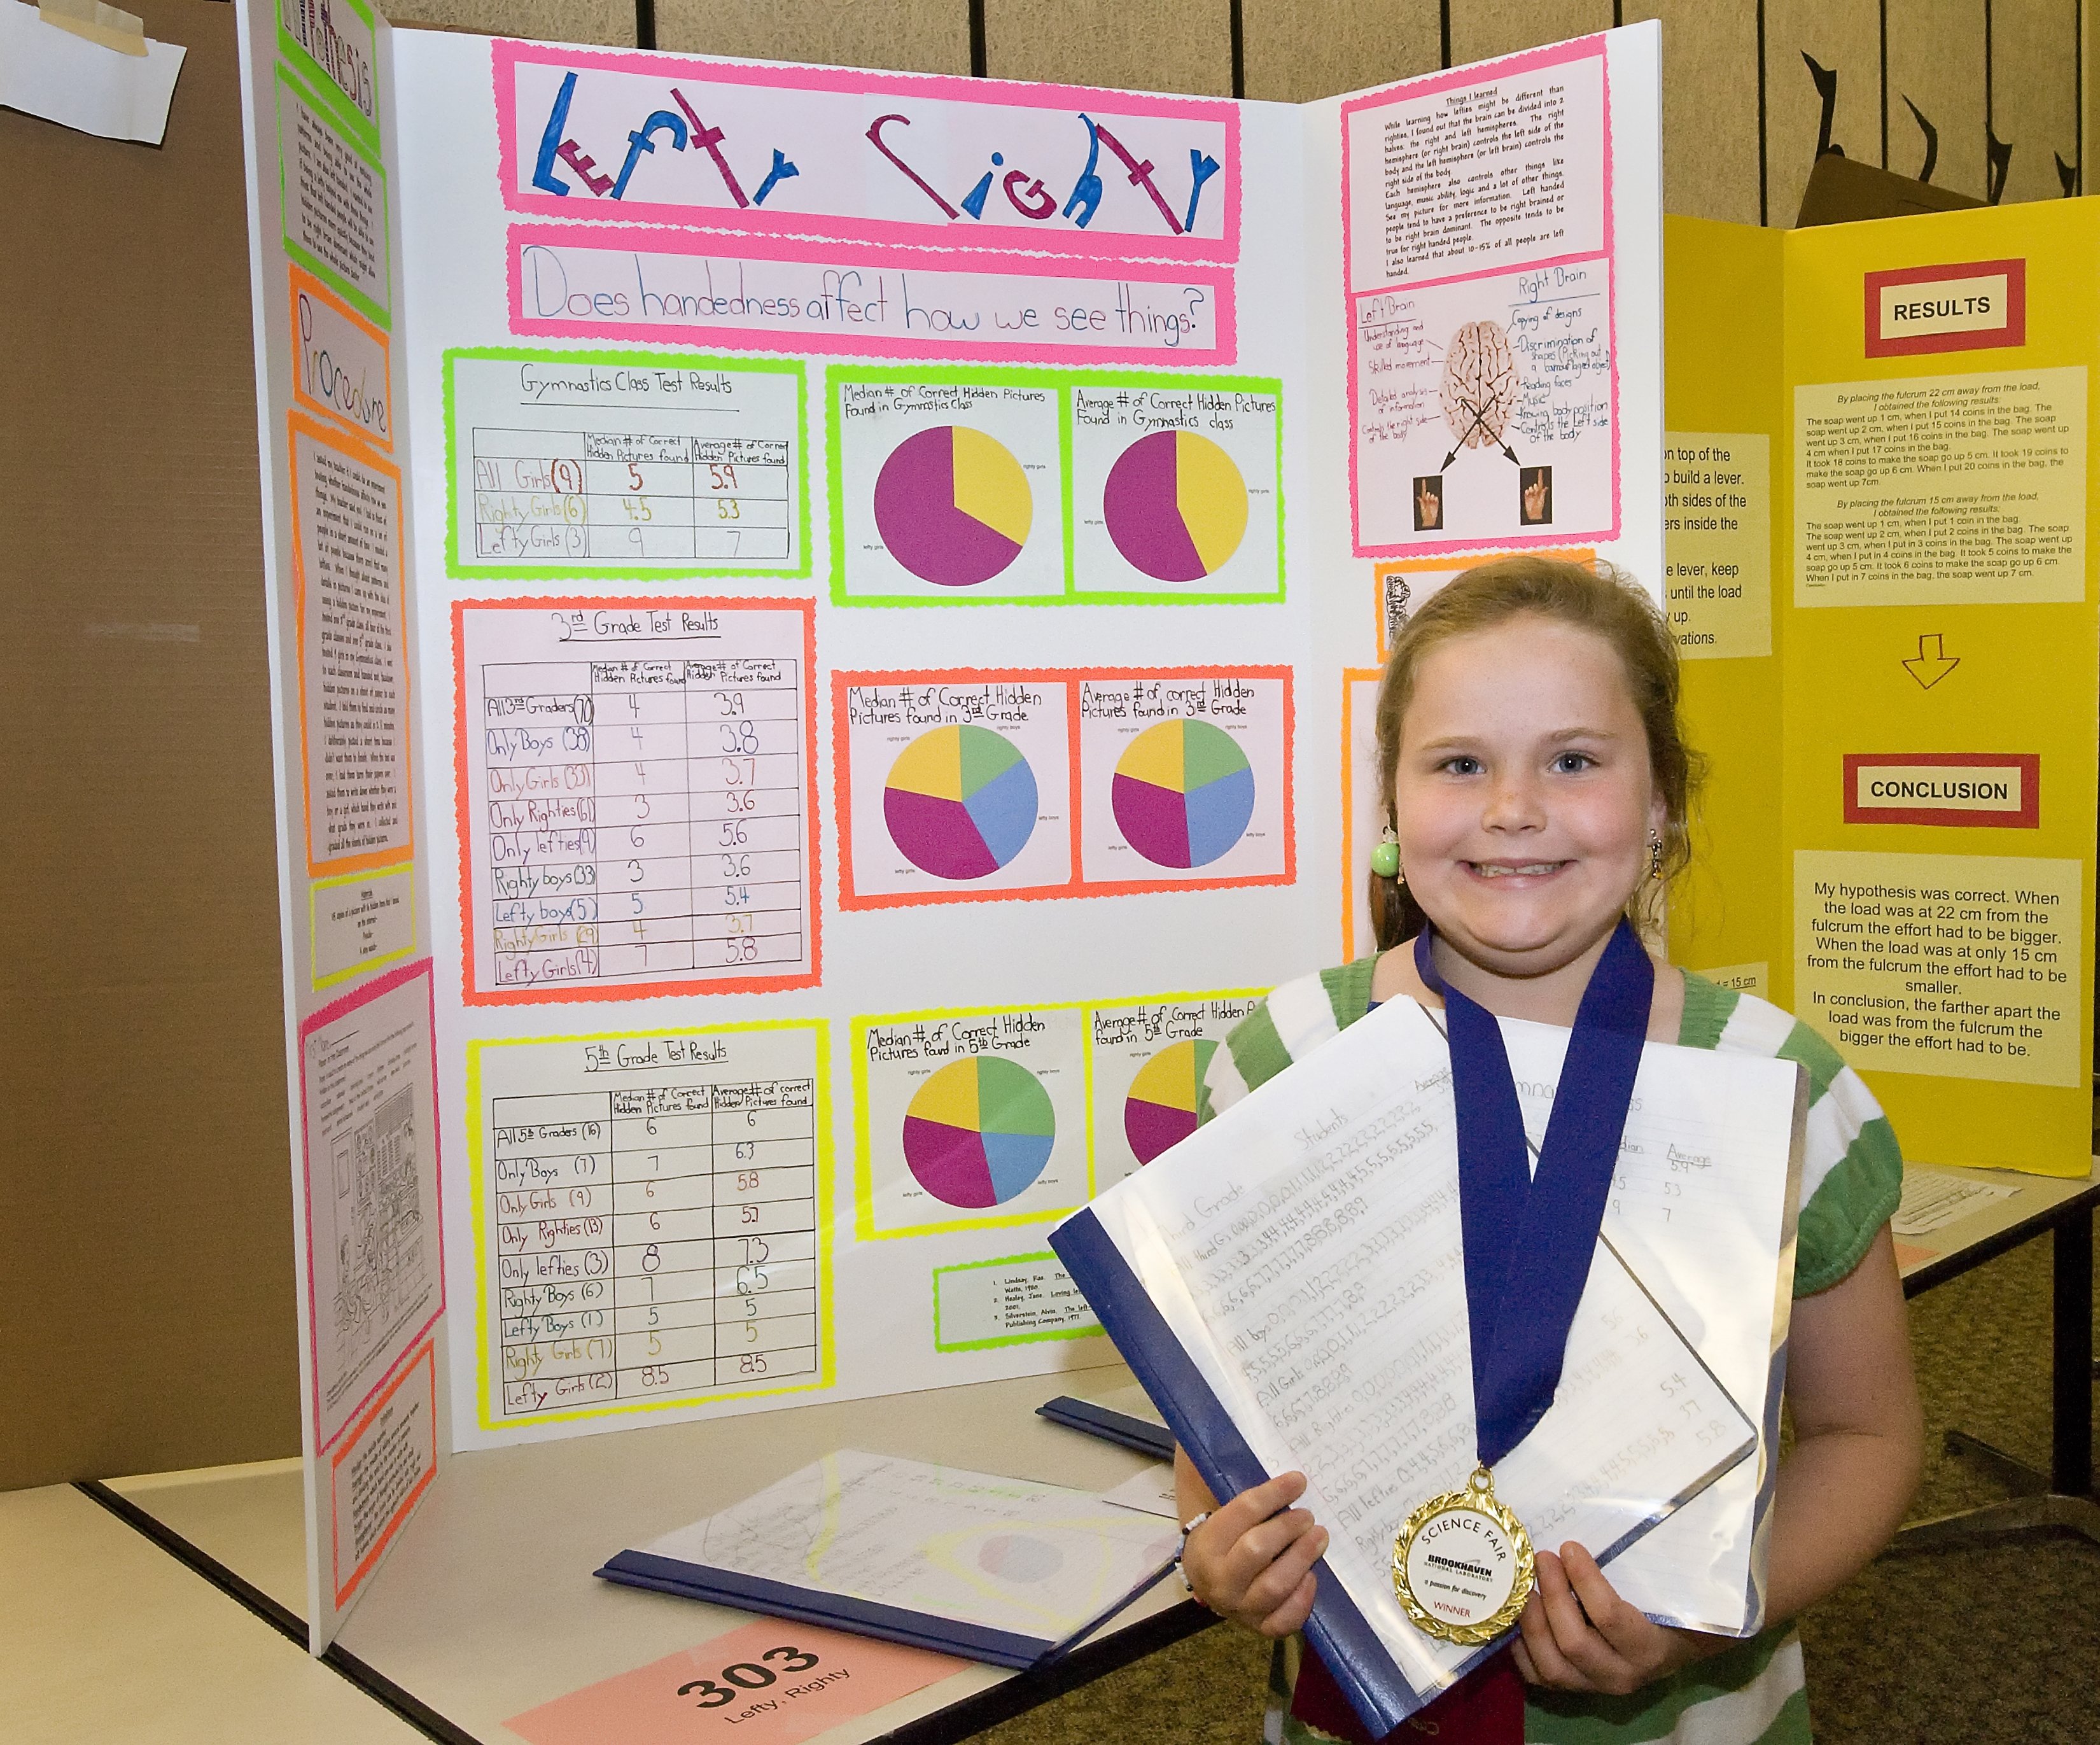 10 Stunning Award Winning Science Fair Project Ideas from ant control to wind energy winning projects at brookhaven 40 2022